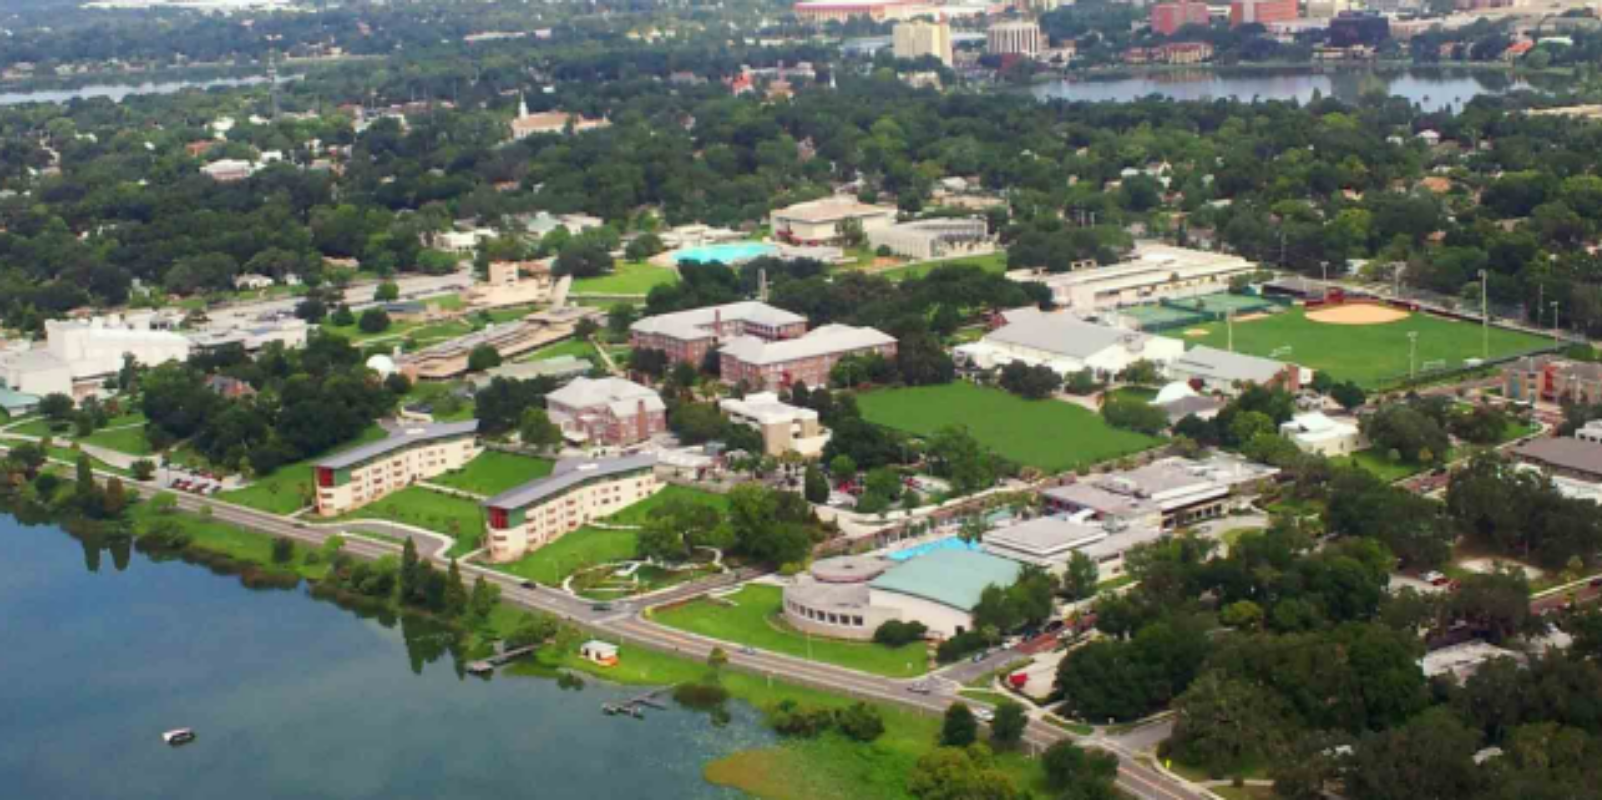 Florida Southern College: Ranking, Notable Alumni, Admission Process, Acceptance Rate, Majors, Address and everything you need to know